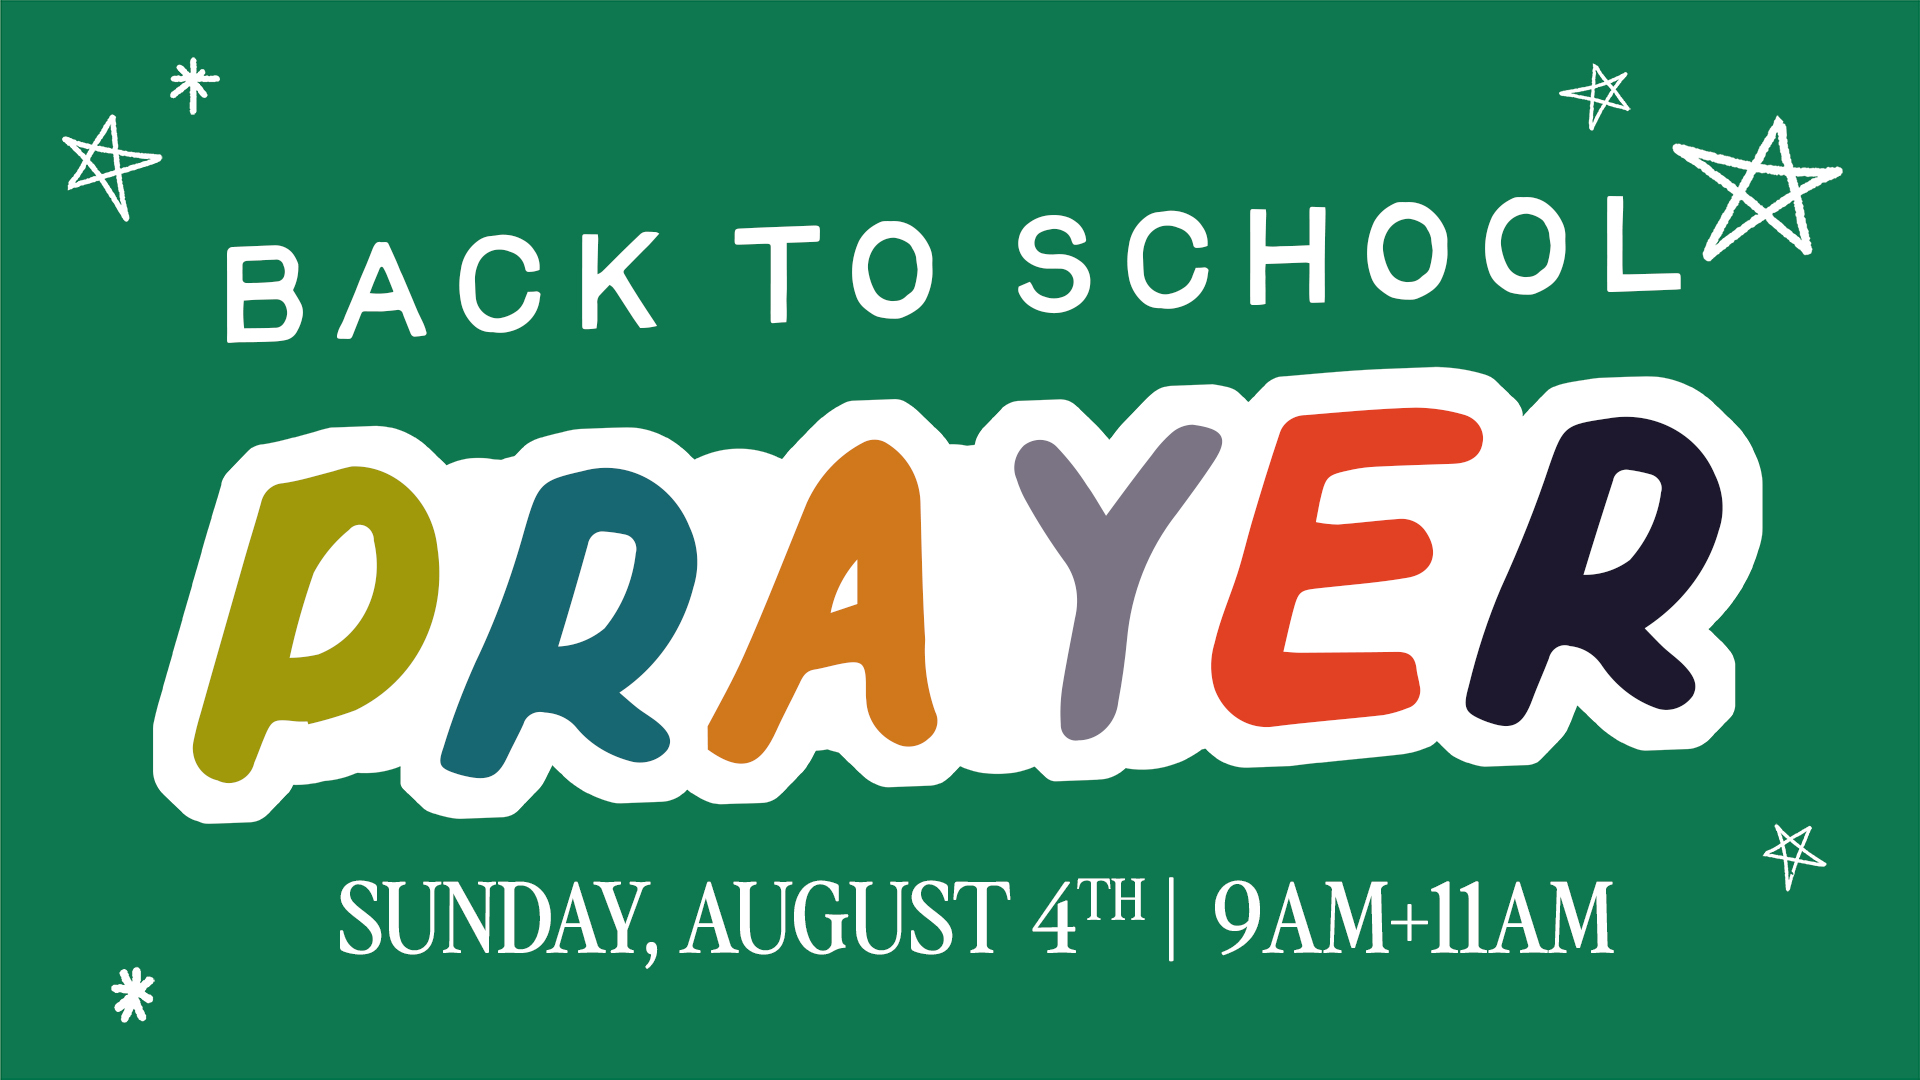 Back to School Prayer at the Midtown campus